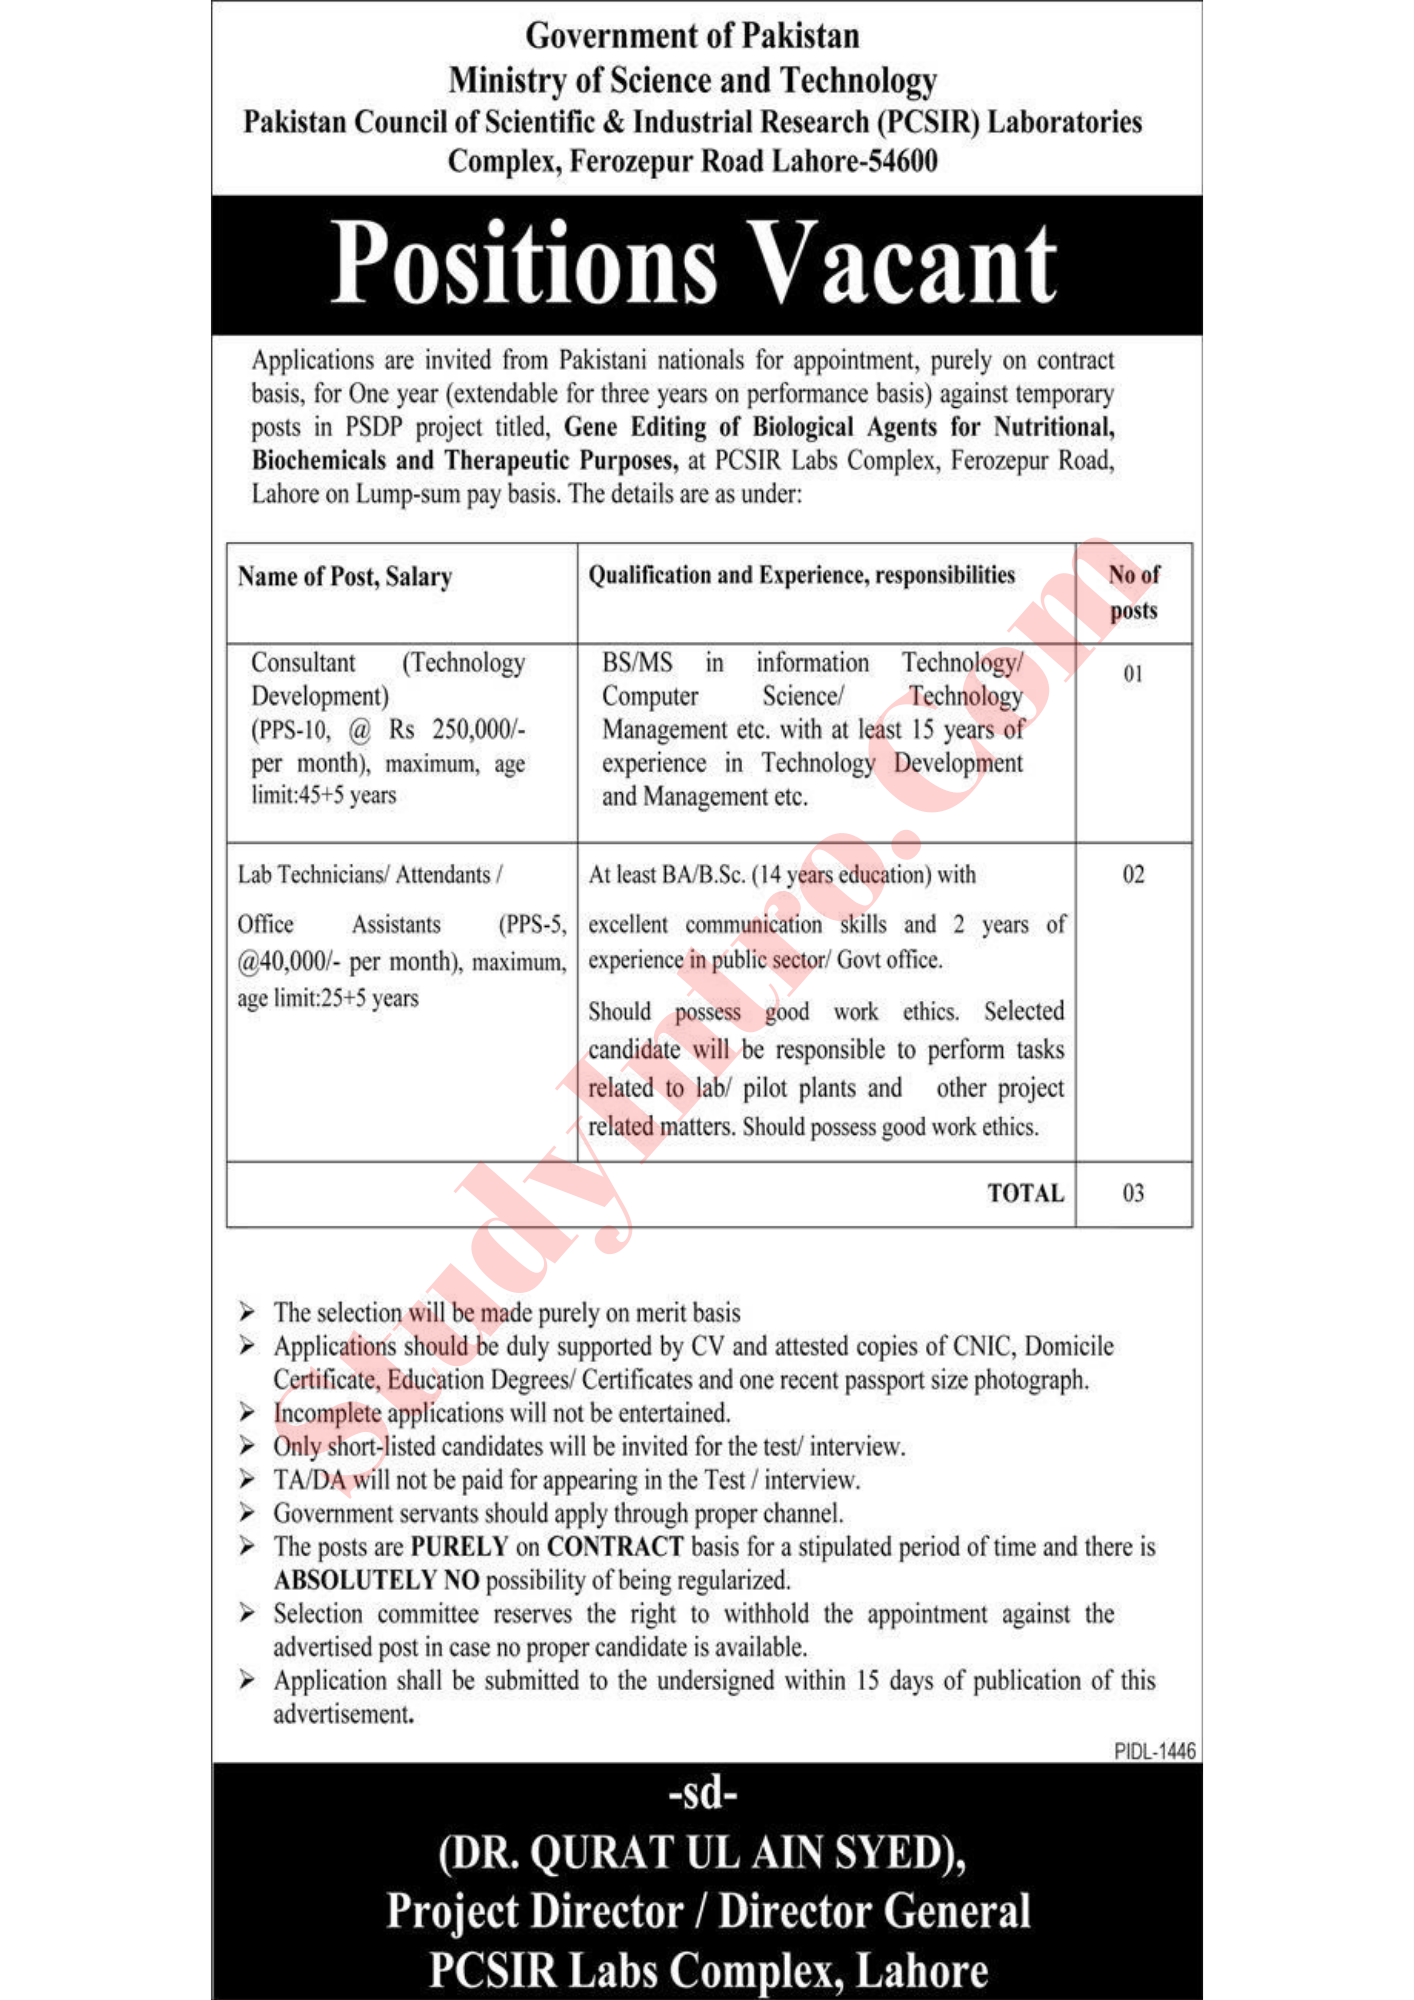 Govt Jobs in Ministry of Science and Technology 2021